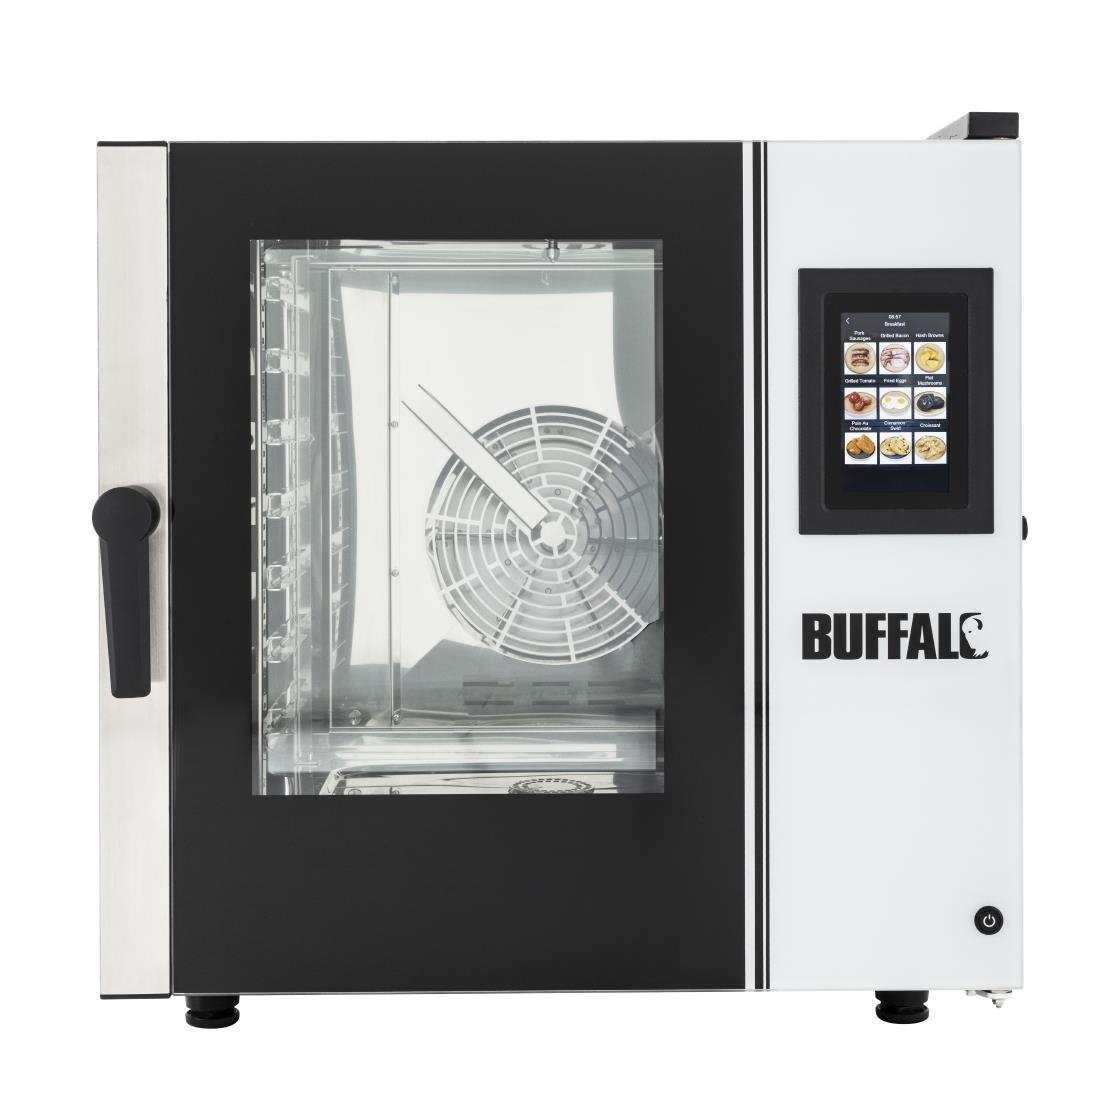 SA774 Buffalo Smart Touchscreen Combi Oven 7 x GN 1/1 with Installation Kit